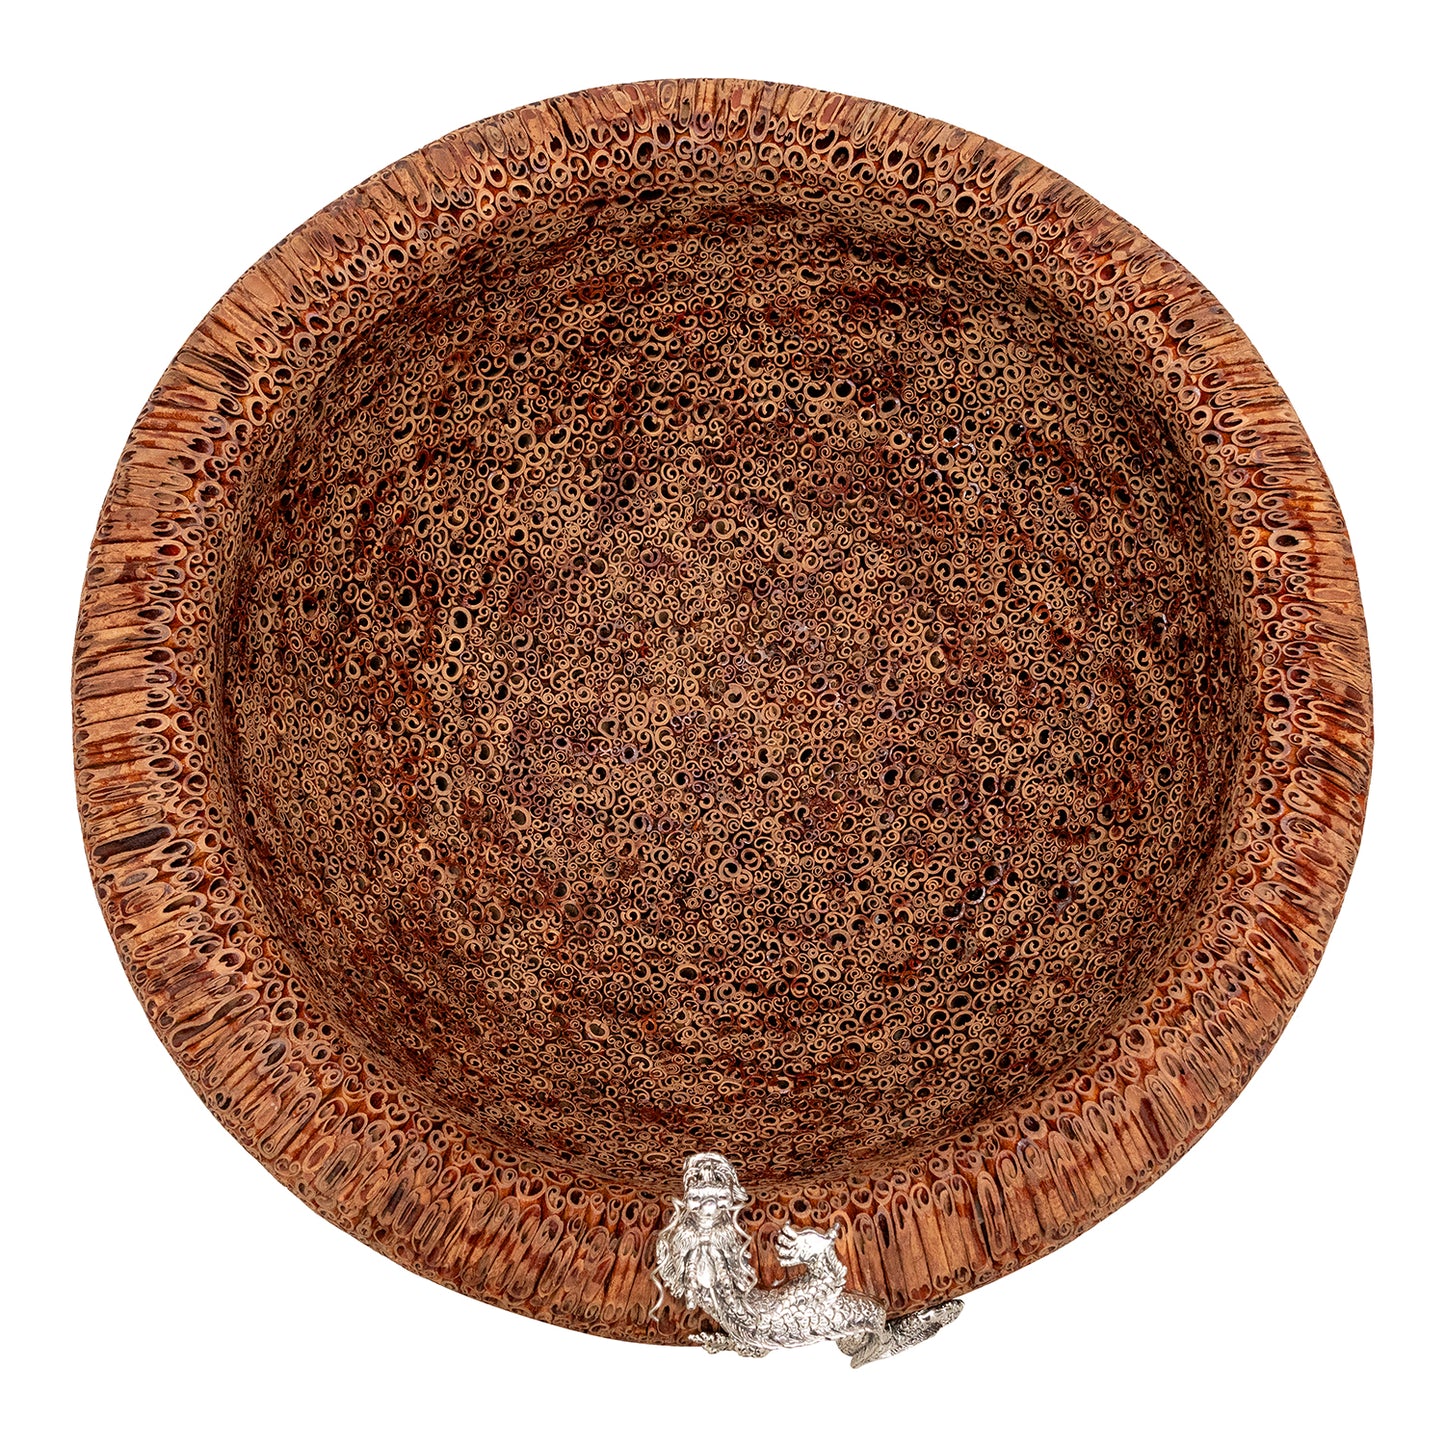 Cinnamon Bowl with Swirling Silver Dragon #L